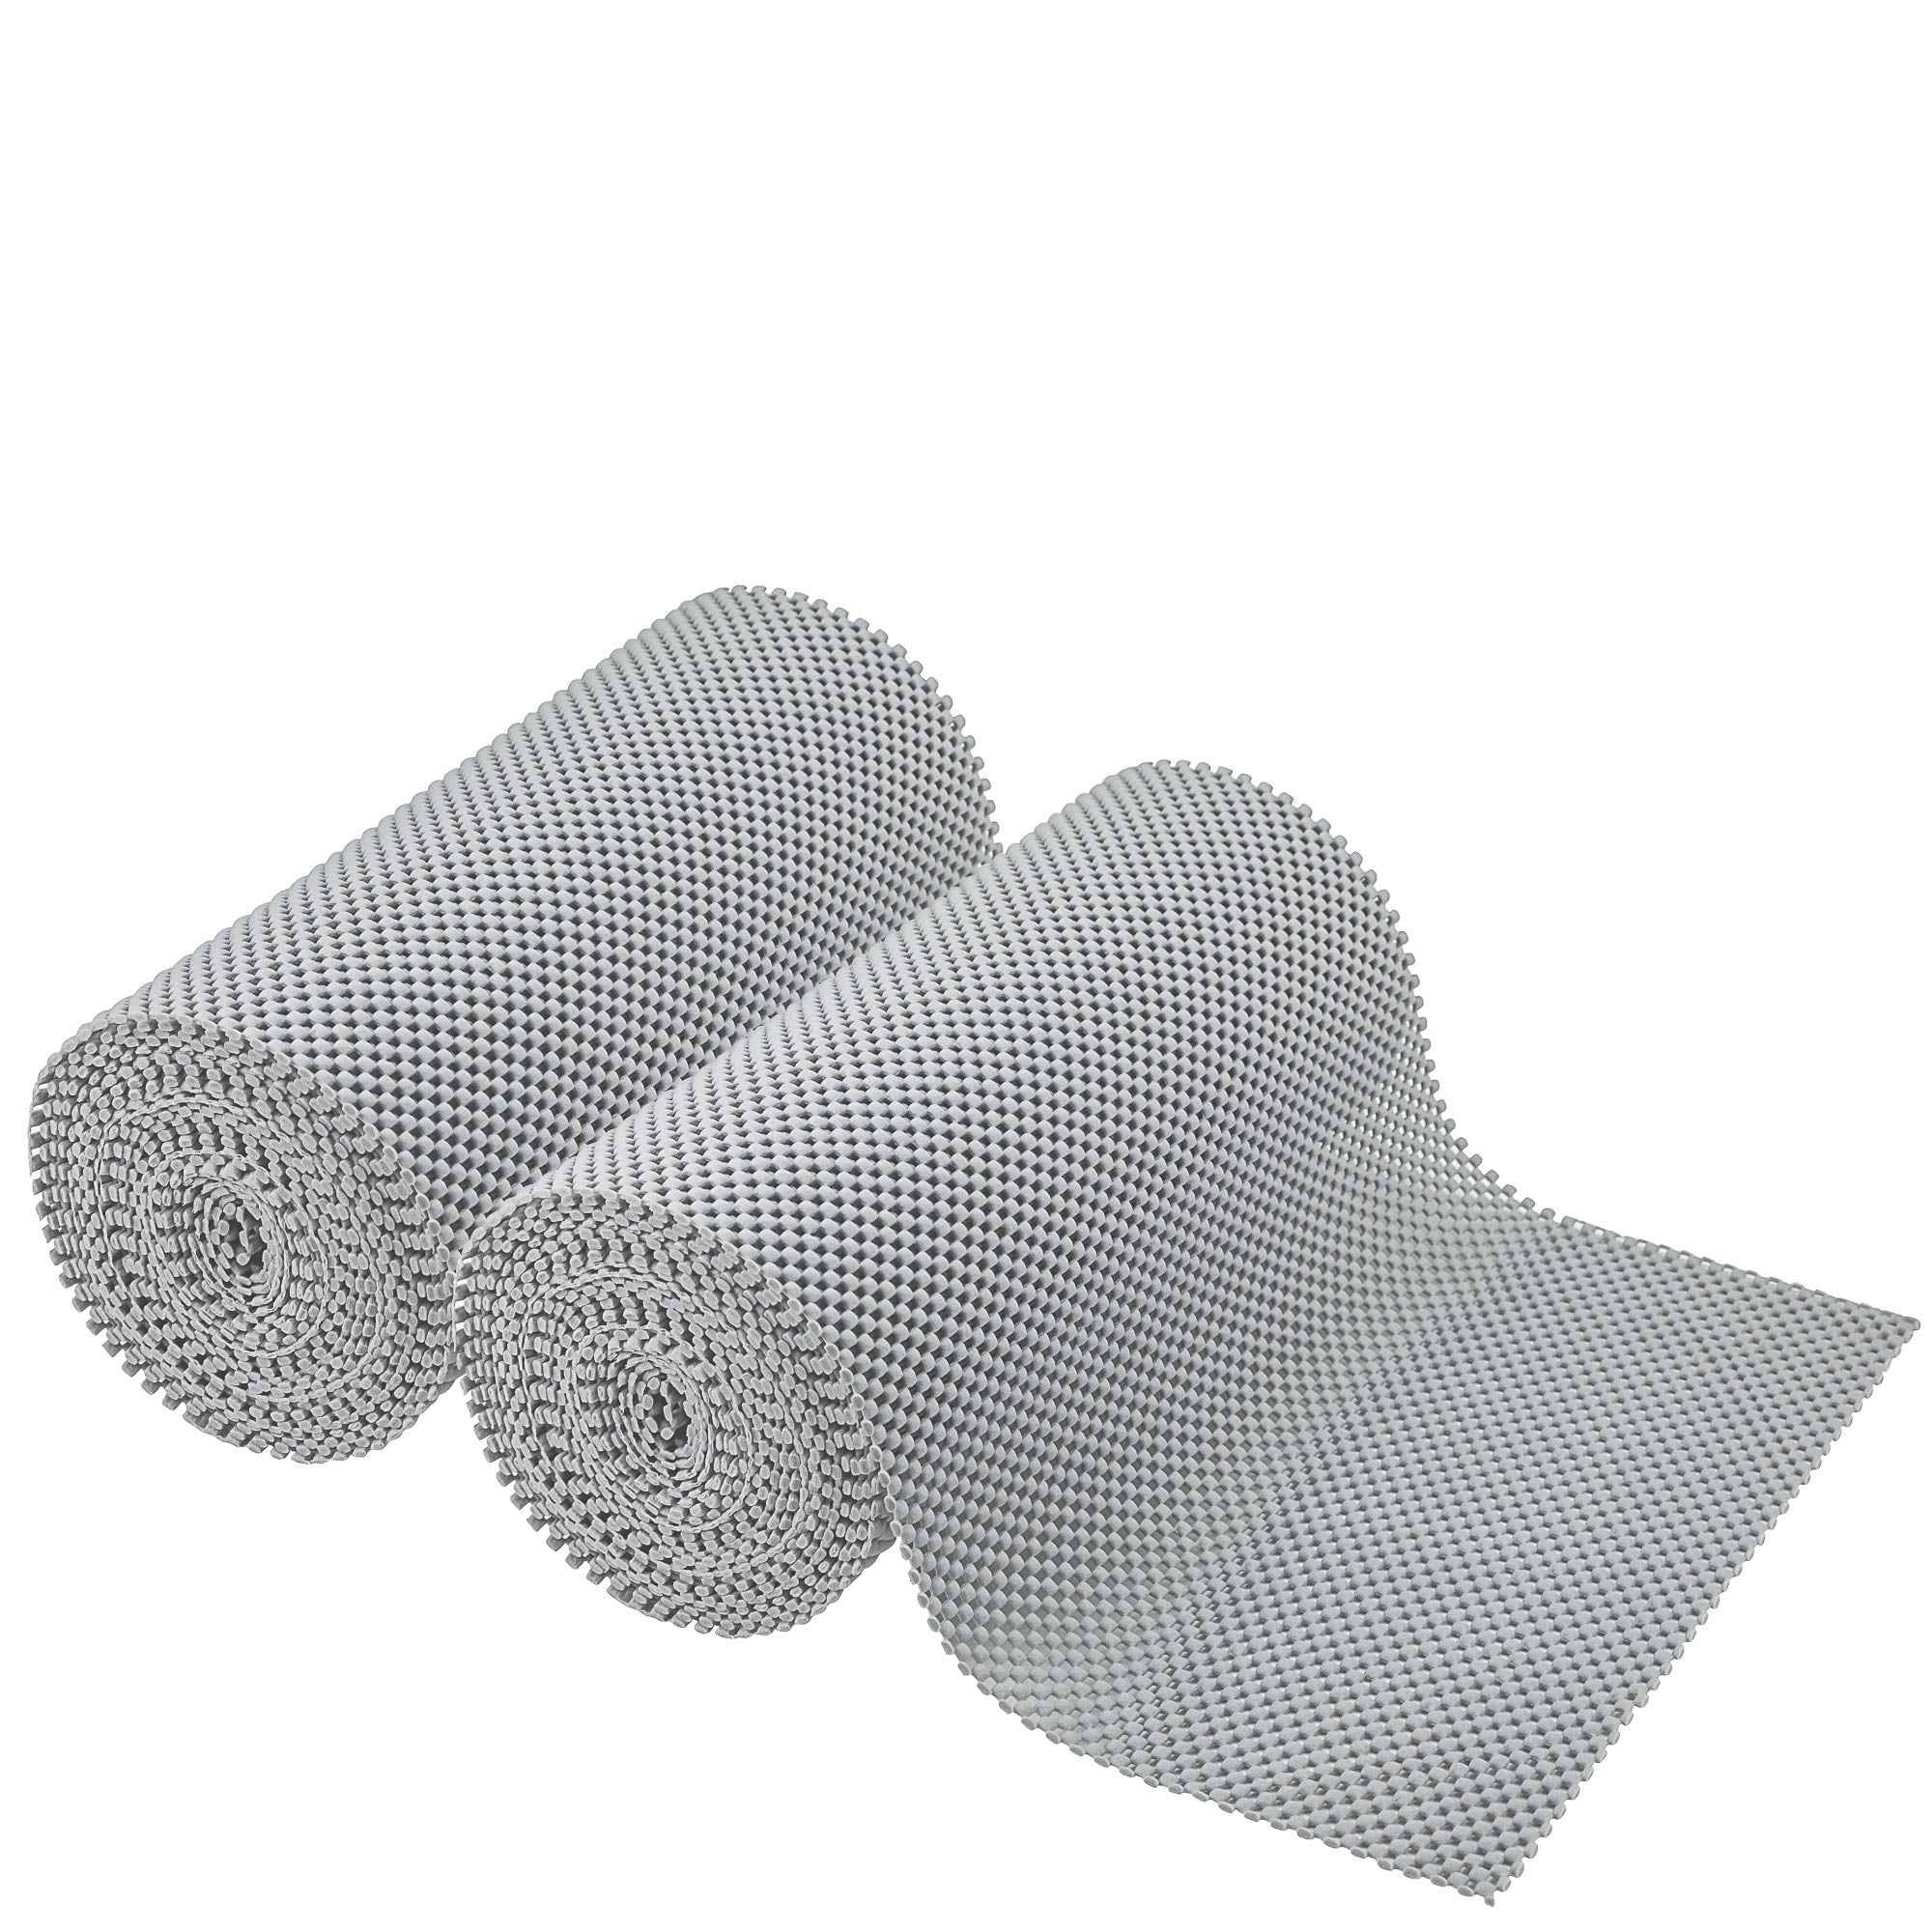 SteadMax Shelf Liner, 12 in x 40 FT Total, Non-Adhesive, Non-Slip Grip Drawer  Liner, Gray (2 Rolls) 